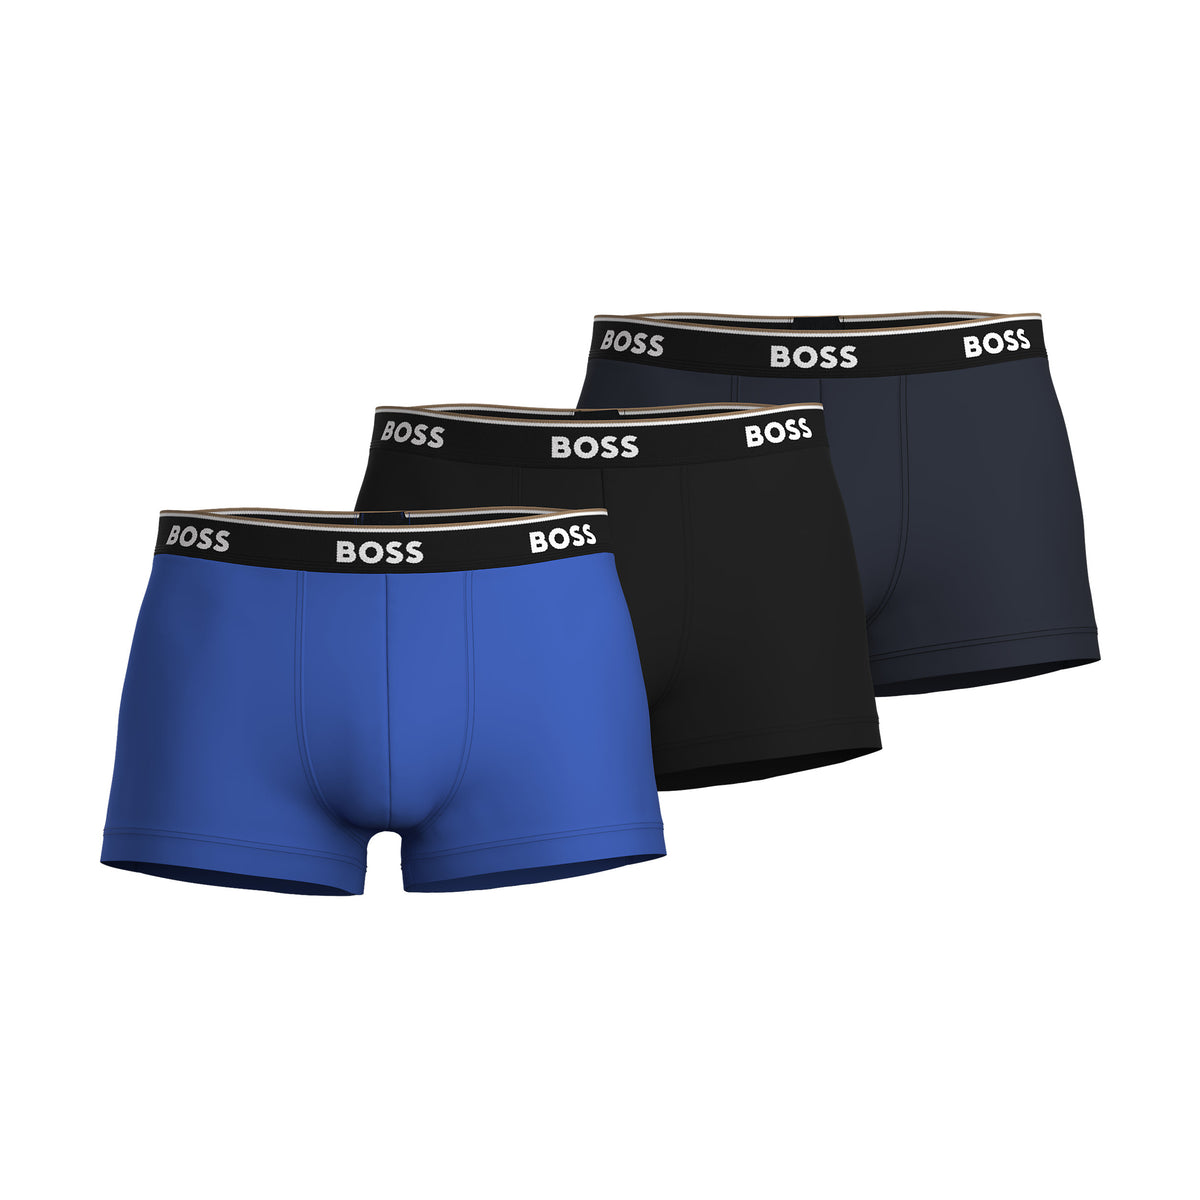 BOSS - 3-Pack Of Stretch Cotton Trunks With Logo Waistbands 50489612 9 ...